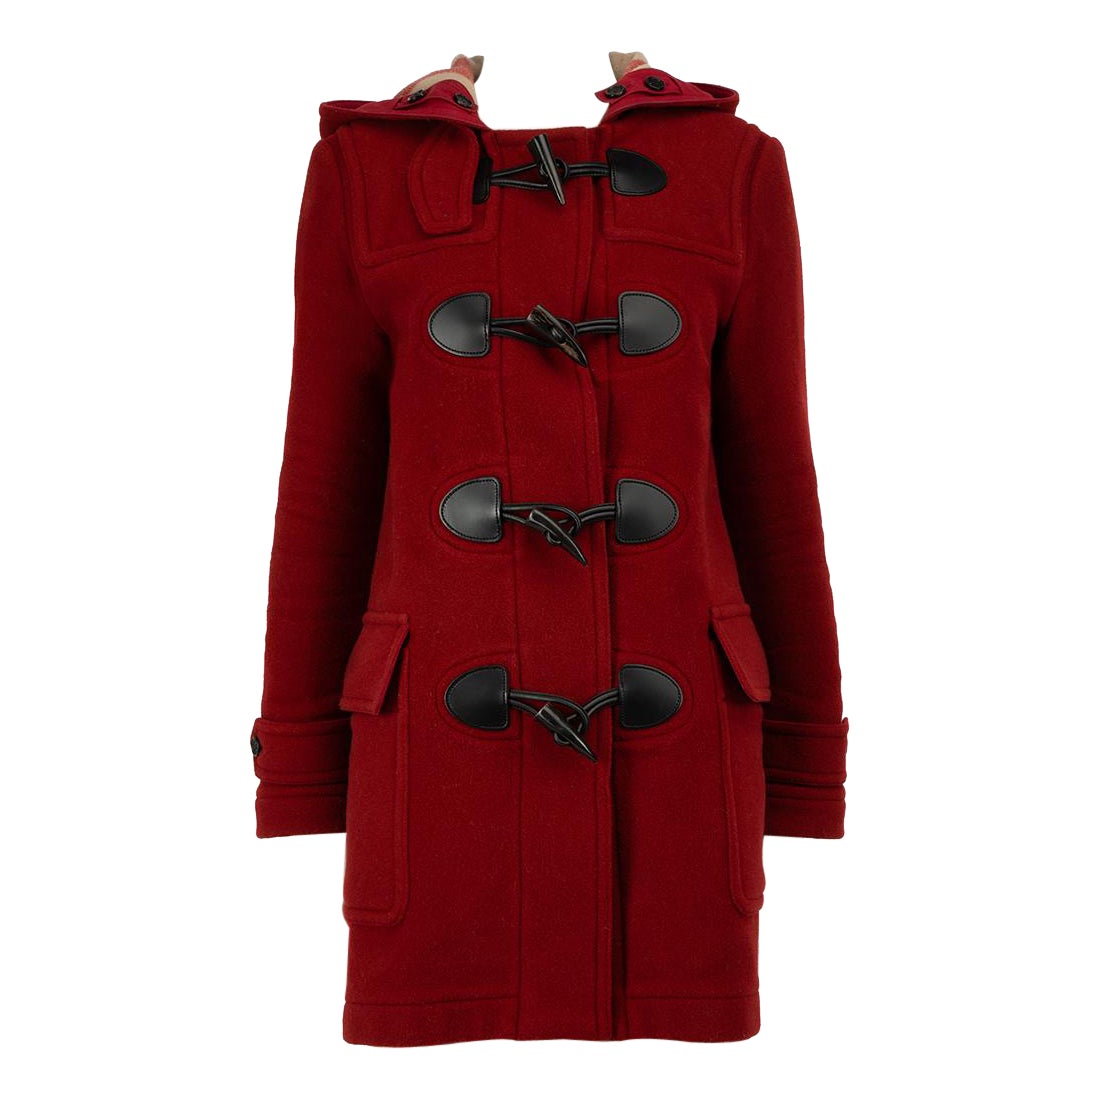 Manteau The Mersey Burberry rouge taille S en vente